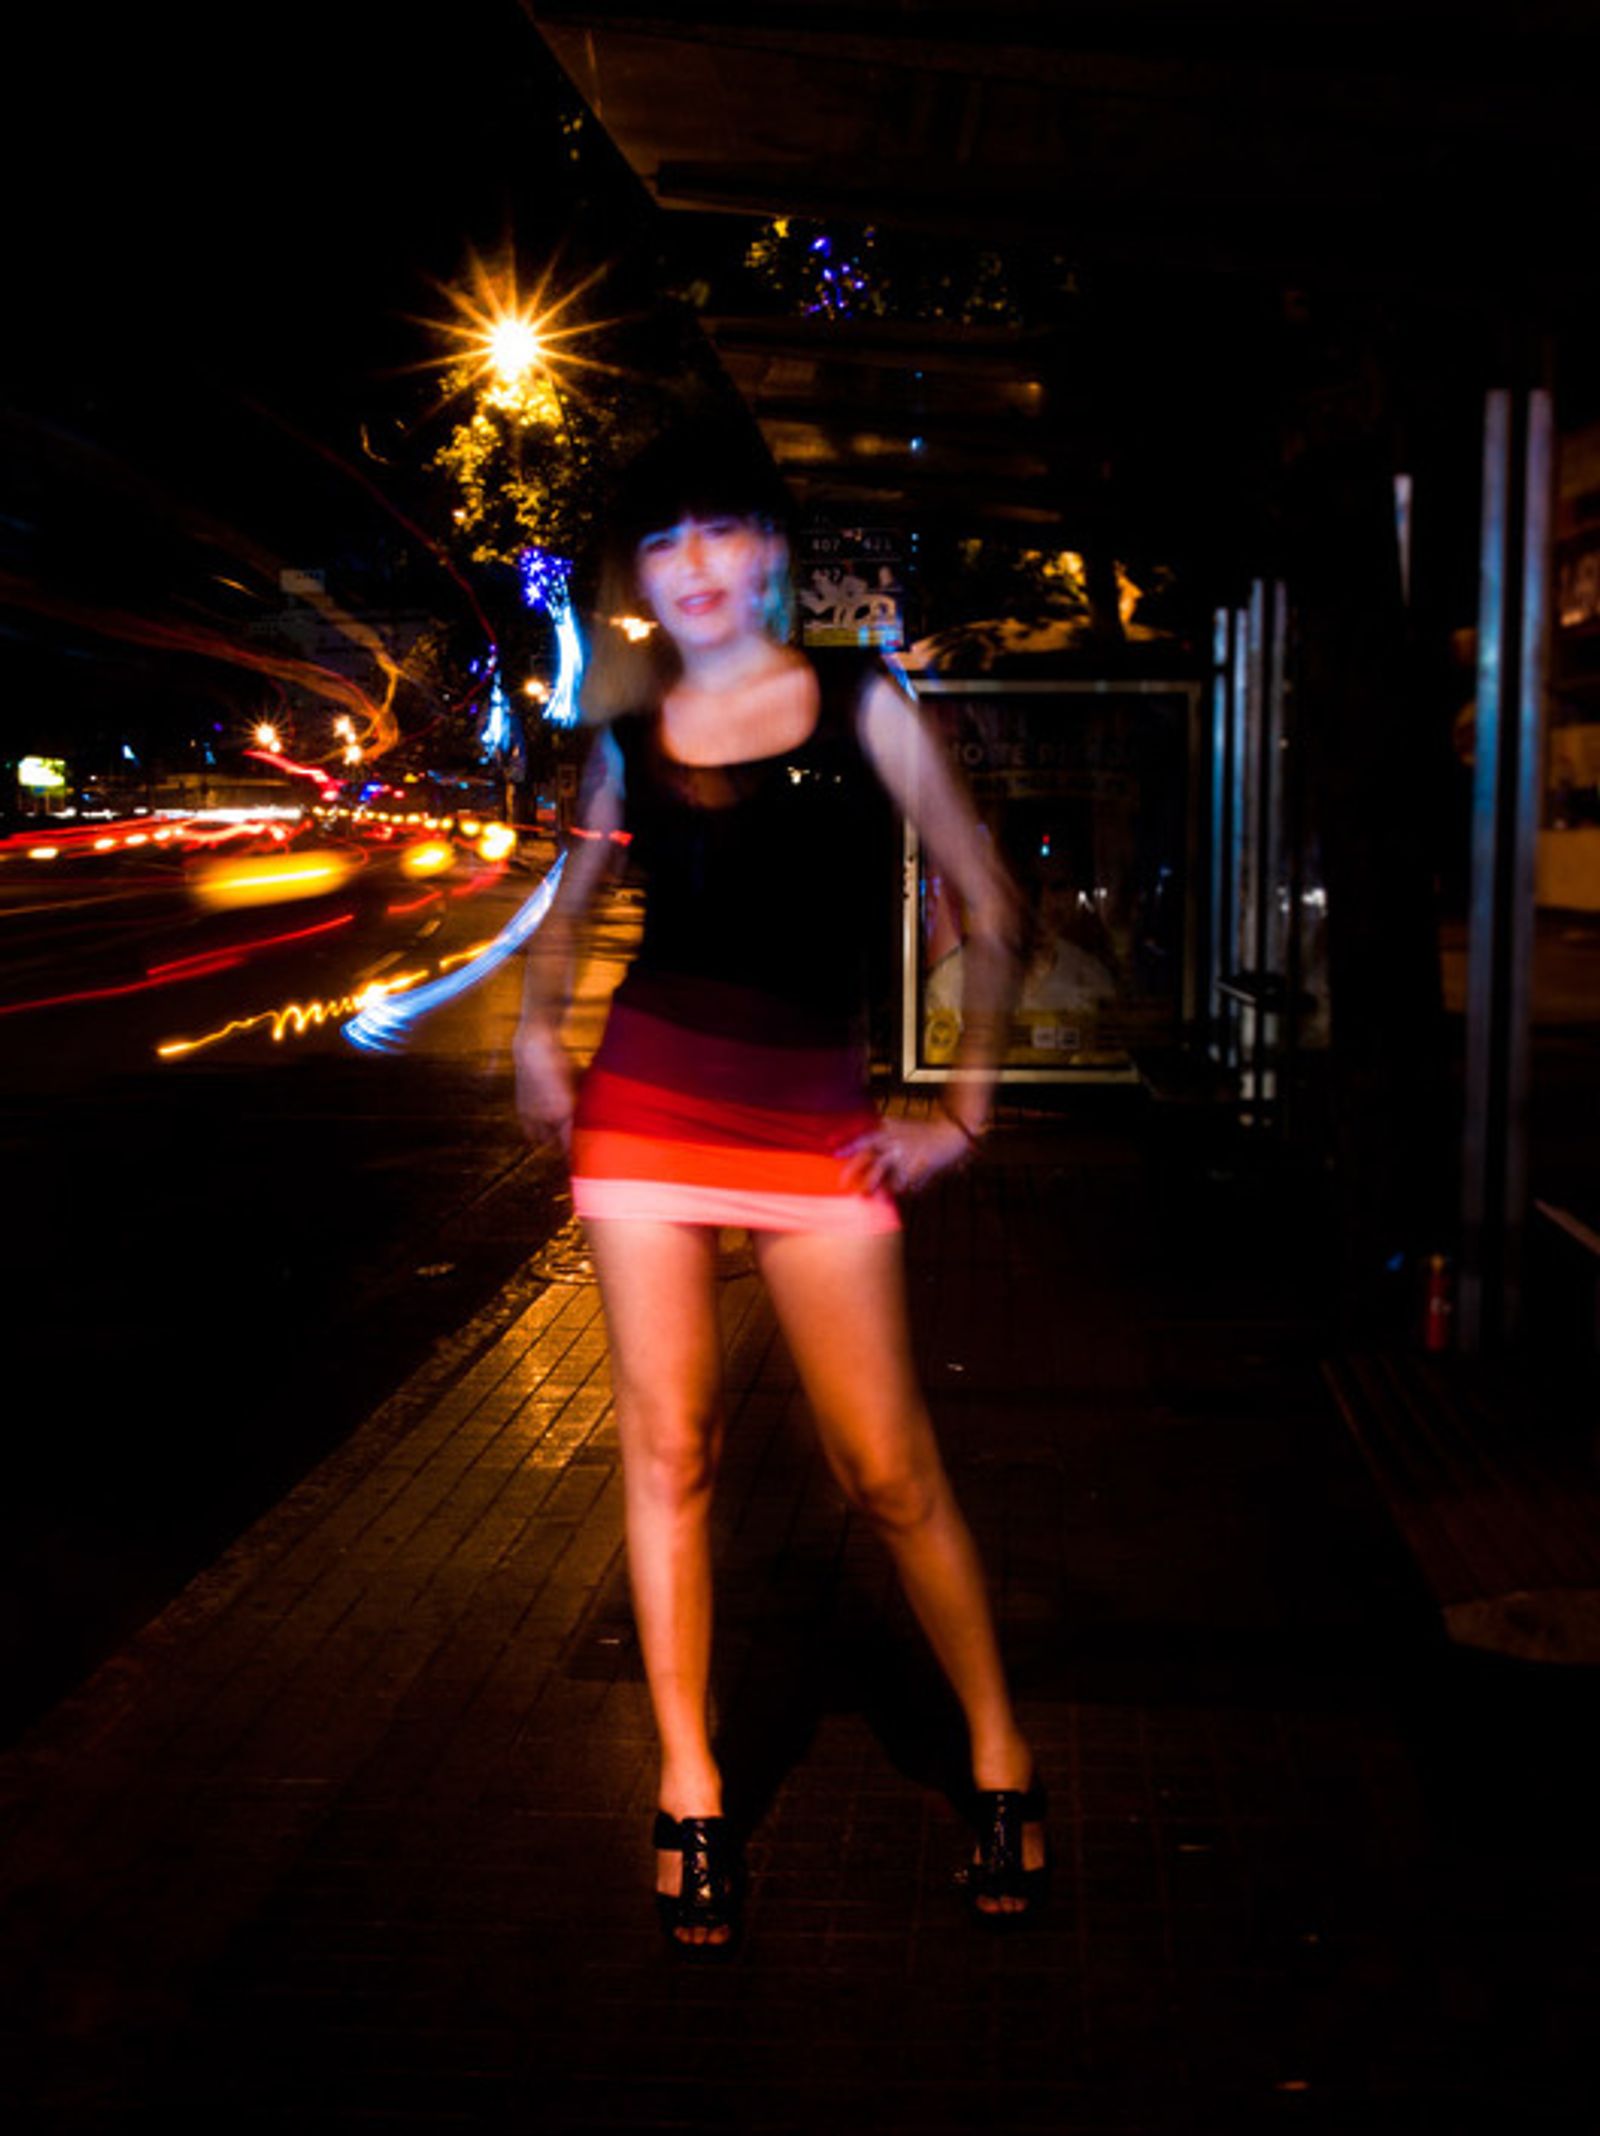 © Henrietta Soininen - Image from the Prostitutes photography project